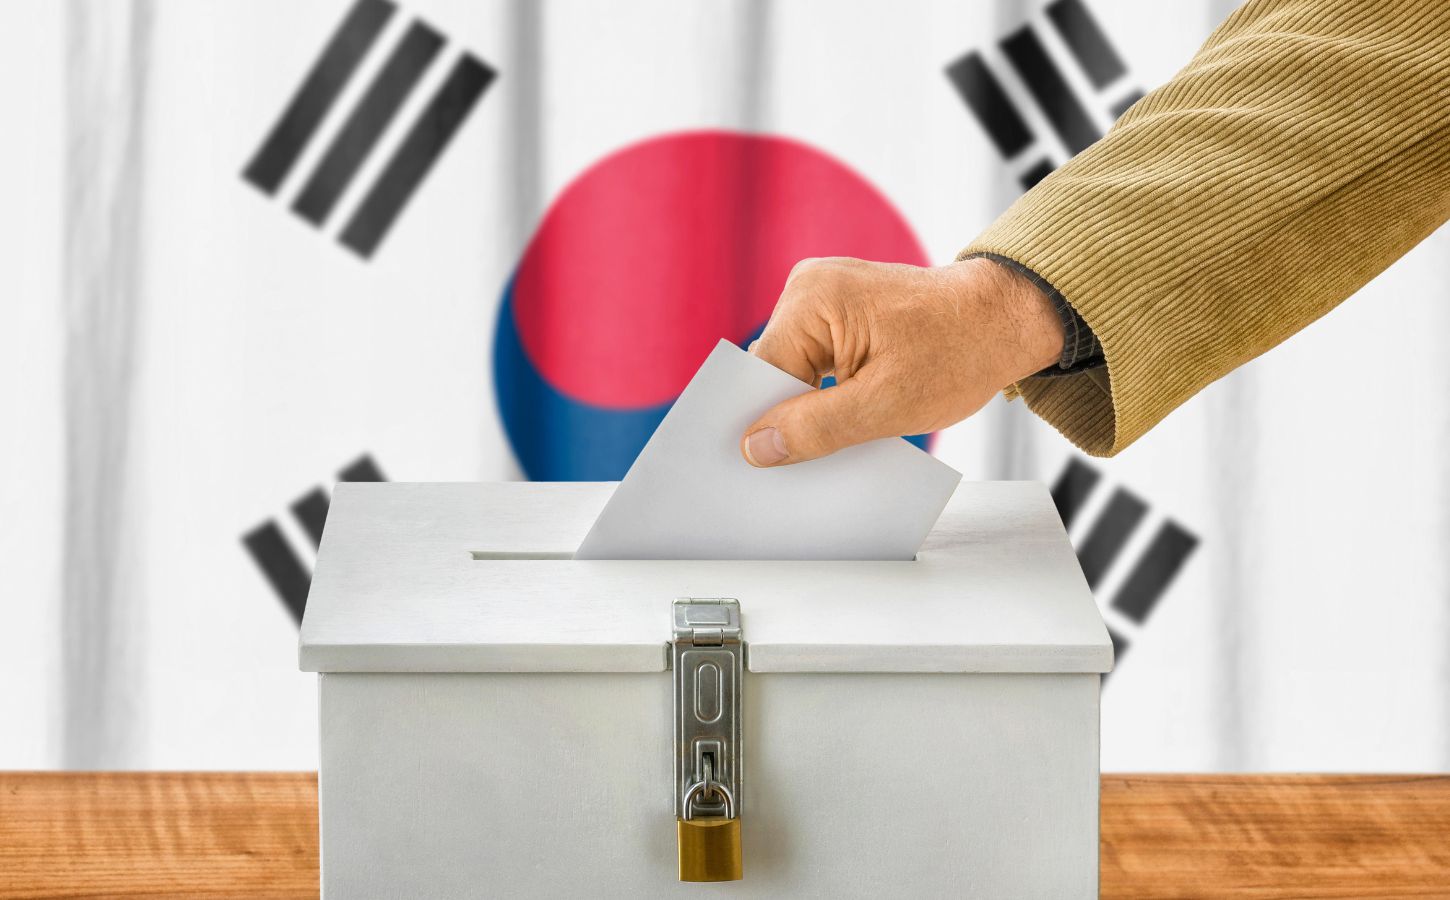 A voter casts their ballot at an election in South Korea, where the main opposition party has vowed to give animals a new legal status